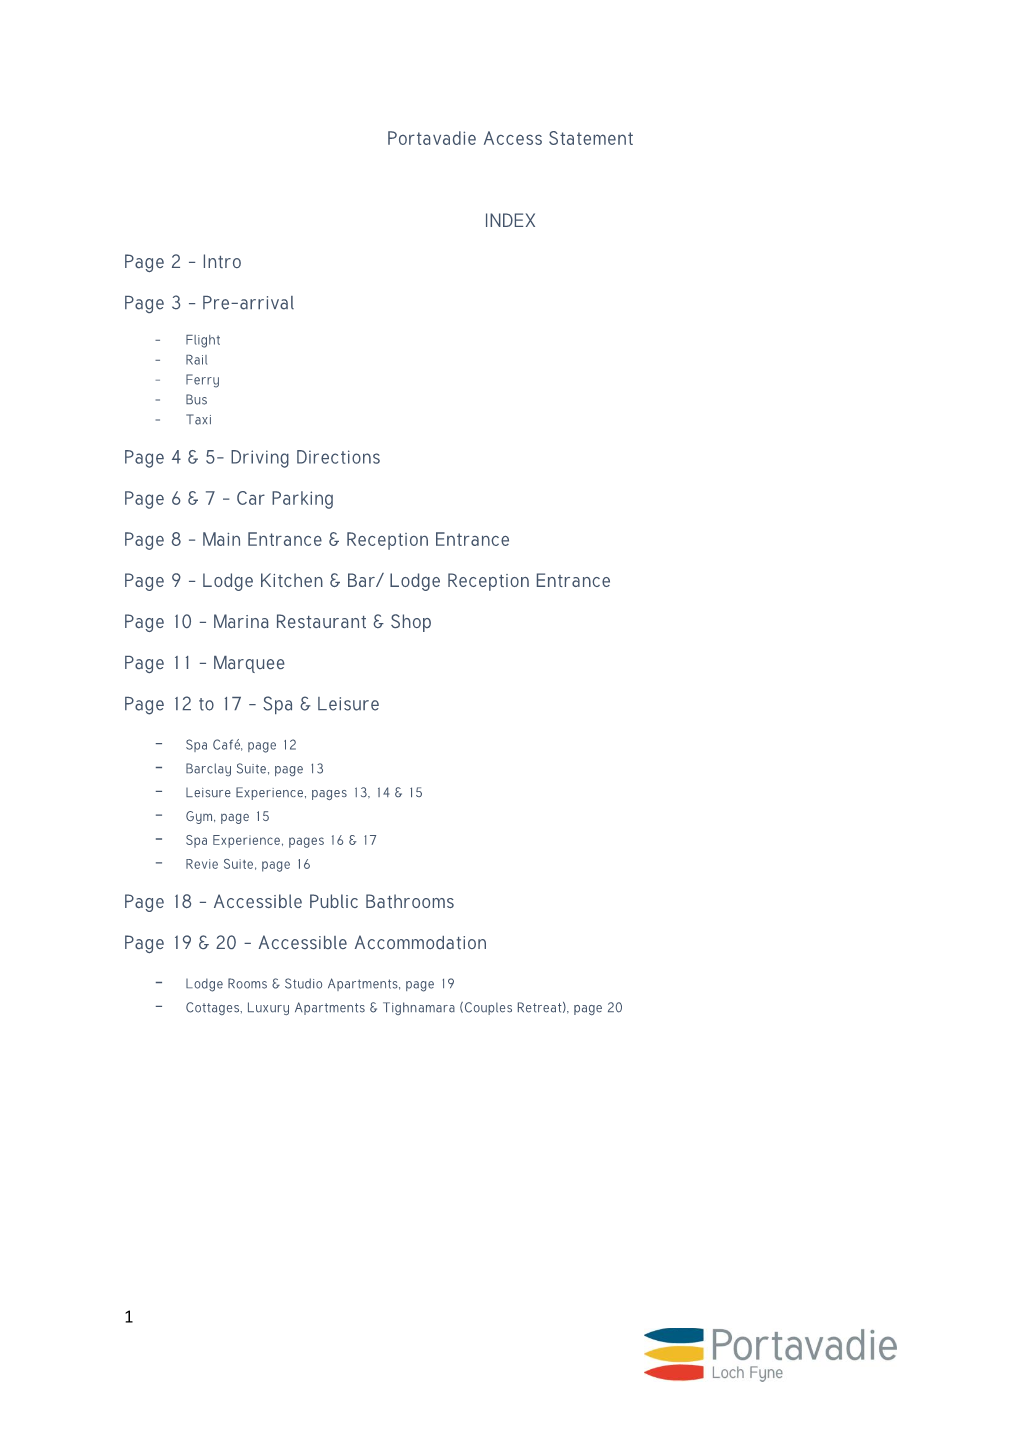 1 Portavadie Access Statement INDEX Page 2 – Intro Page 3 – Pre-Arrival